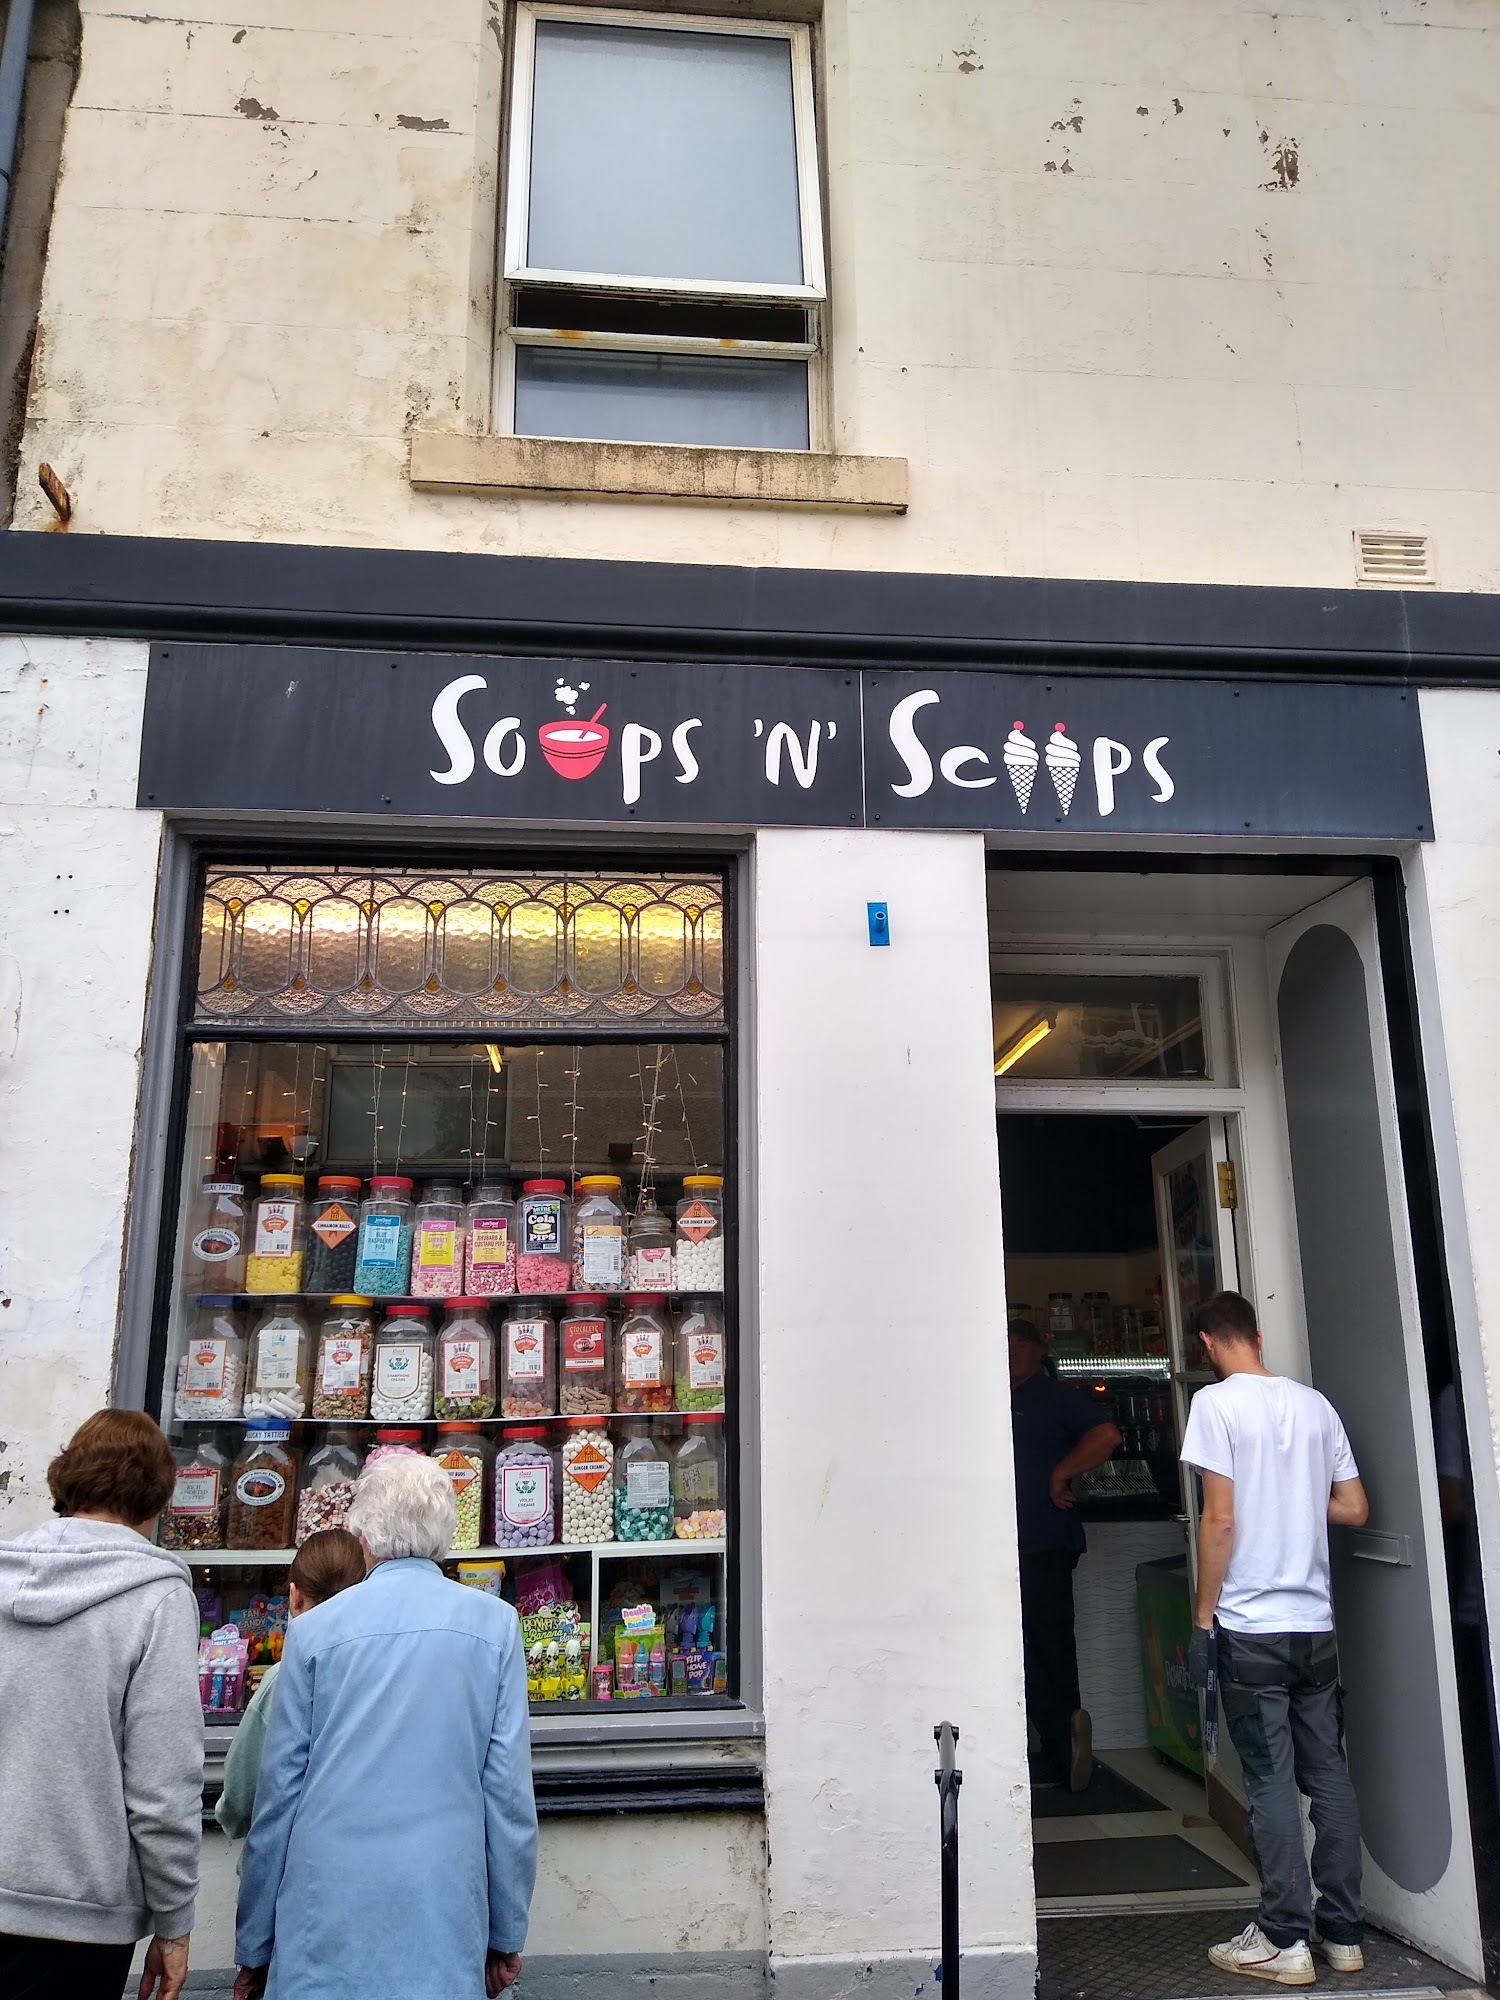 Soups and scoops